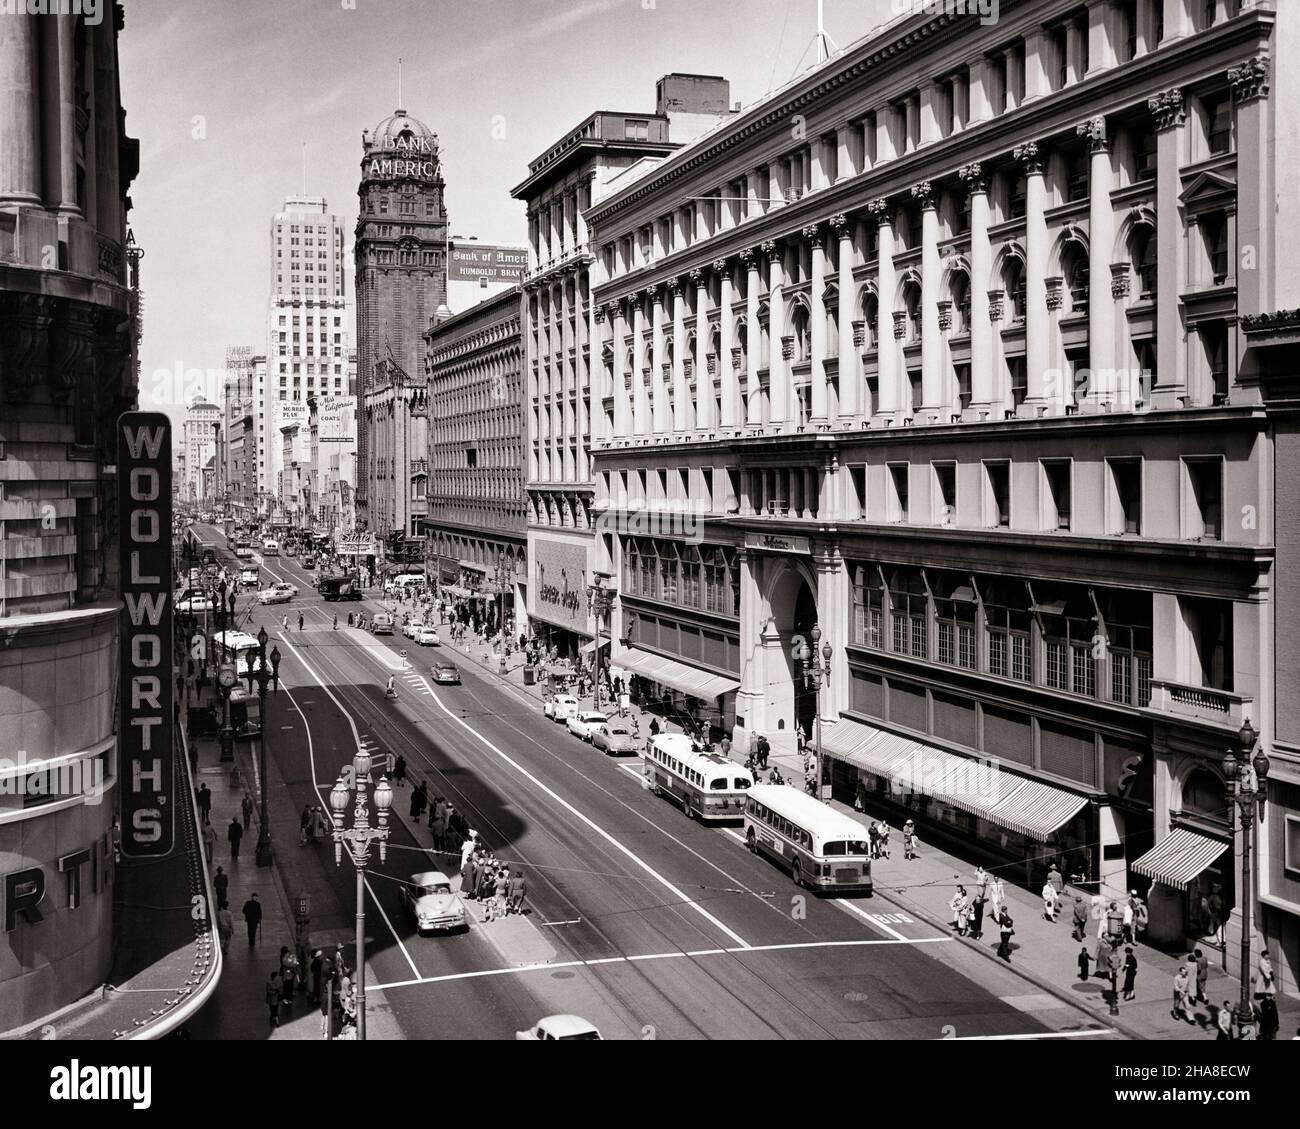 1950s SHOPS ALONG MARKET STREET AT POWELL STREET LOOKING EAST FROM THE EMPORIUM ACROSS FROM WOOLWORTH’S SAN FRANCISCO CA USA - r5541 FST001 HARS TRANSPORTATION B&W NORTH AMERICA SHOPPER NORTH AMERICAN SHOPPERS PEDESTRIAN STRUCTURE HIGH ANGLE ADVENTURE PROPERTY MOTOR VEHICLE AUTOS ALONG EXTERIOR CA STORES REAL ESTATE WEST COAST STRUCTURES ACROSS AUTOMOBILES CITIES VEHICLES EDIFICE SAN FRANCISCO BUSES COMMERCE POWELL TRANSIT WOOLWORTH'S BLACK AND WHITE BUSINESSES MOTOR VEHICLES OLD FASHIONED Stock Photo